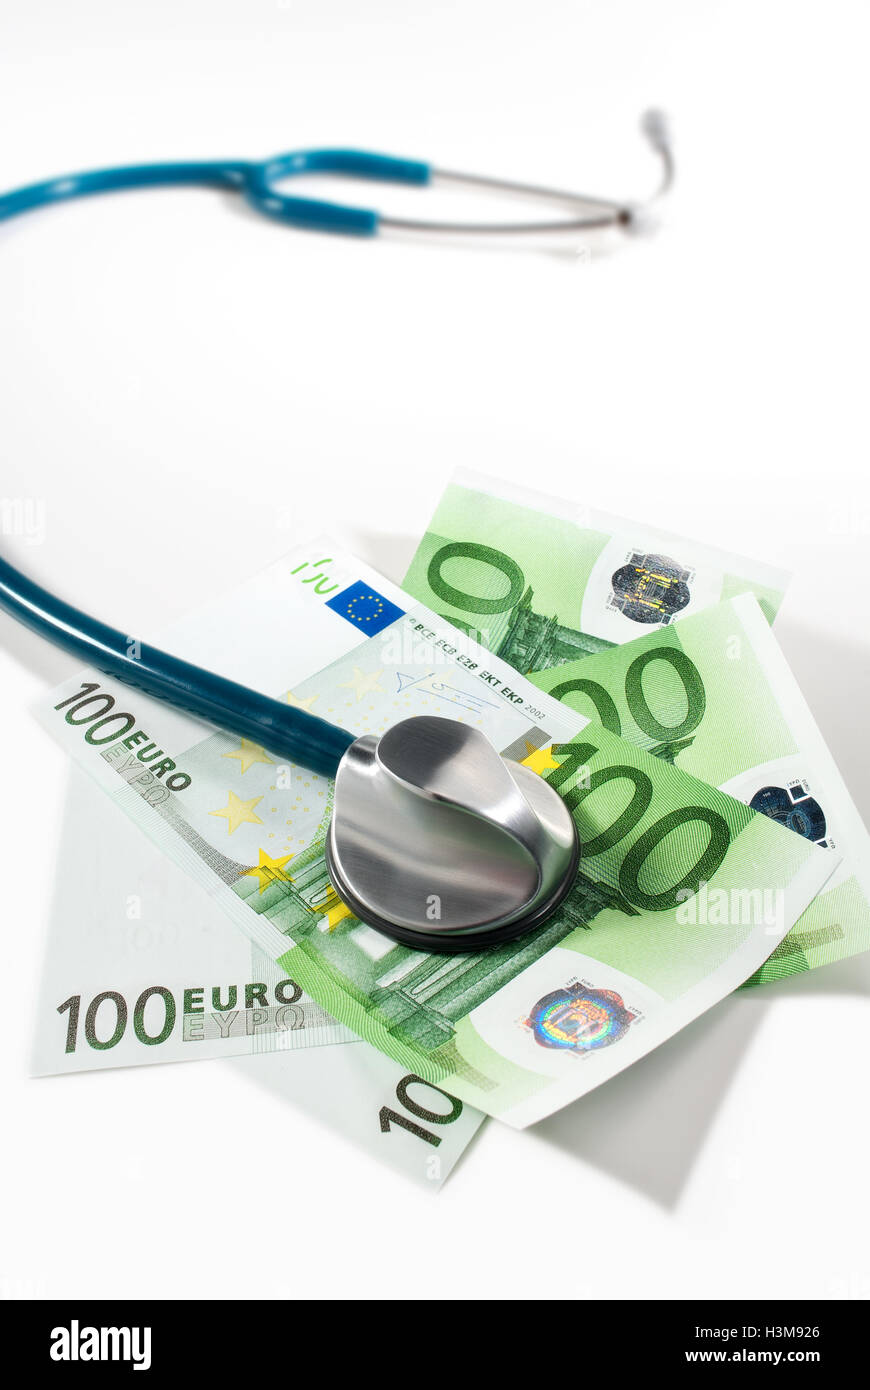 Stethoscope and euro banknotes Stock Photo